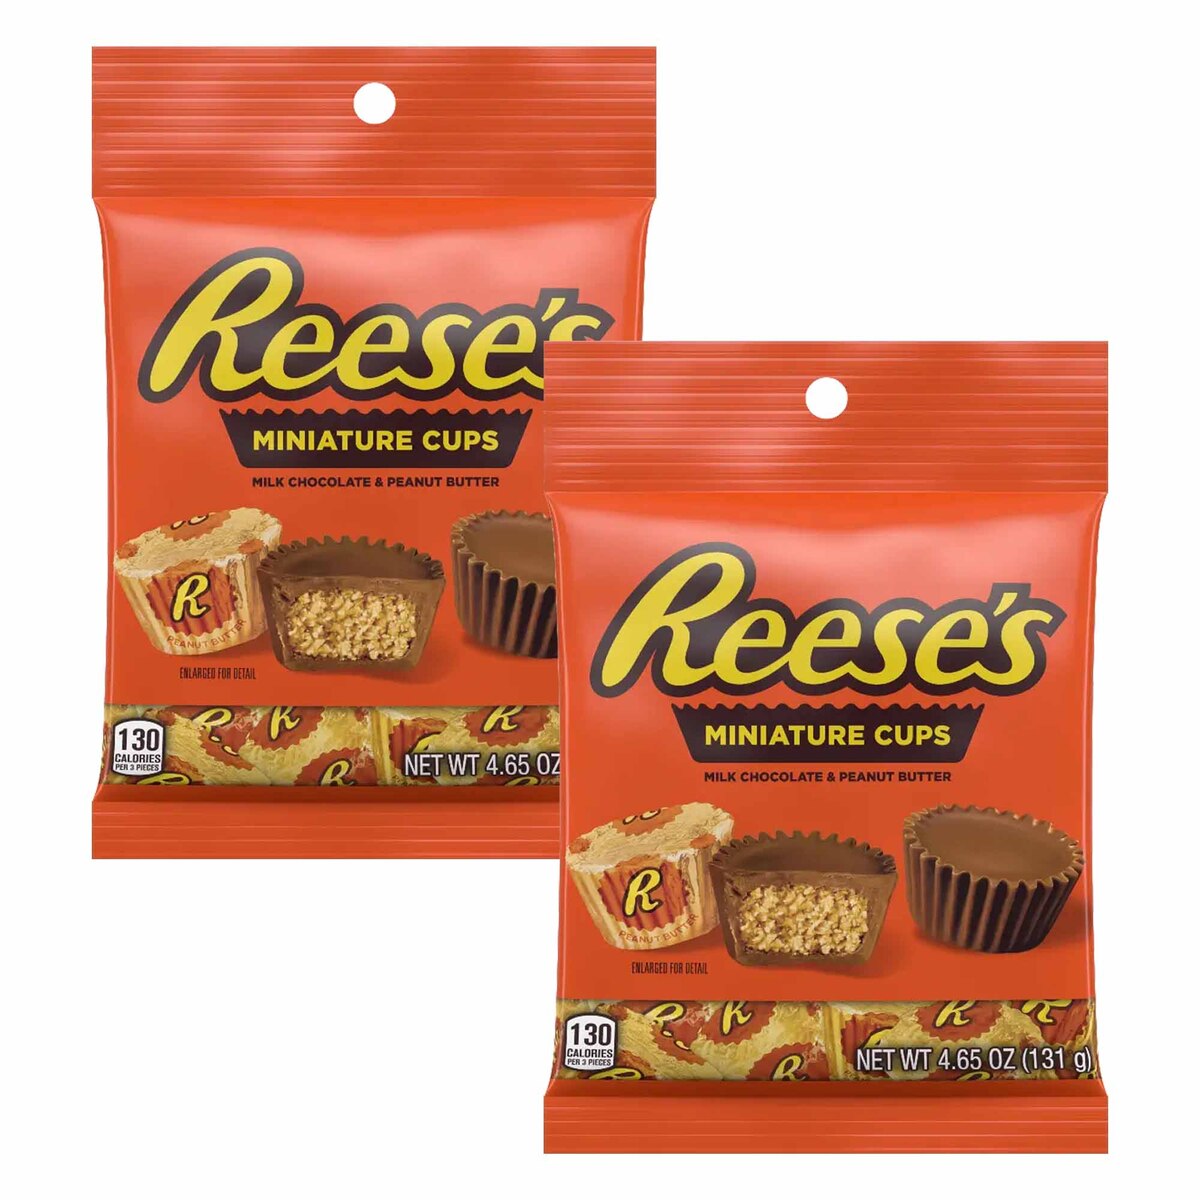 Reese's Miniature Peanut Butter Cups with Milk Chocolate, 2 x 131 g